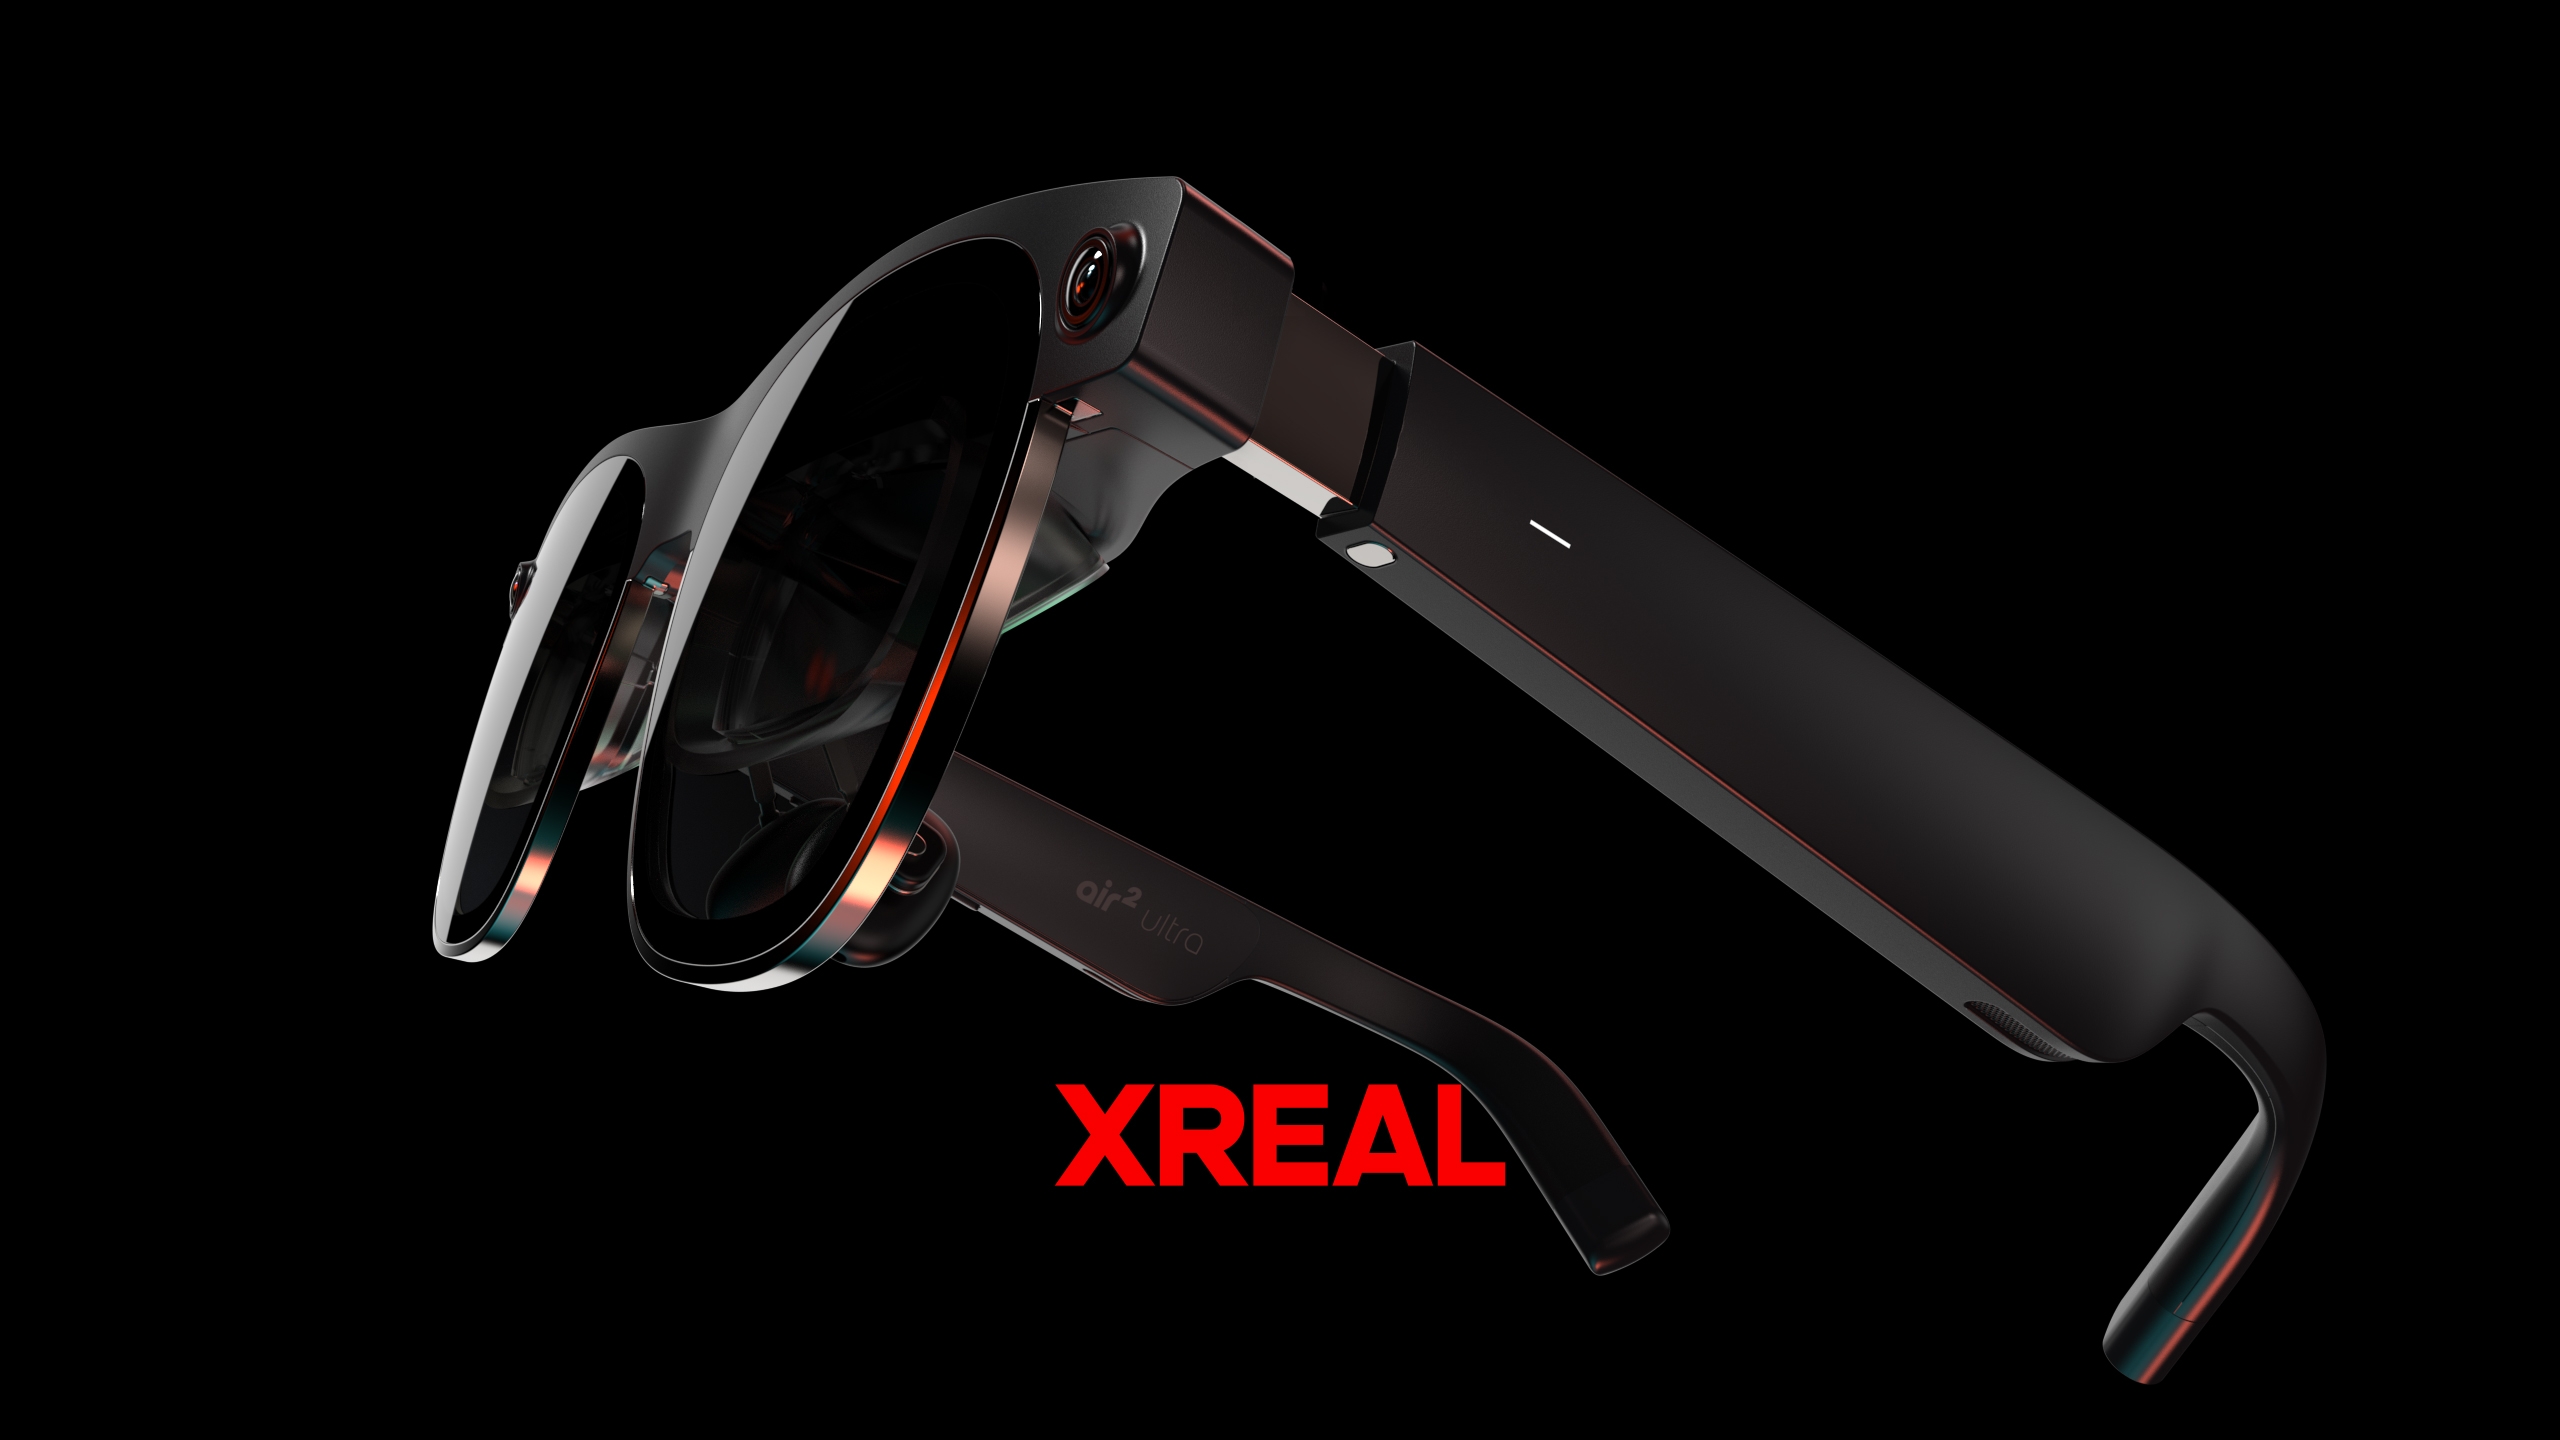 XREAL wants to undercut the Apple Vision Pro with its 'Ultra' AR 